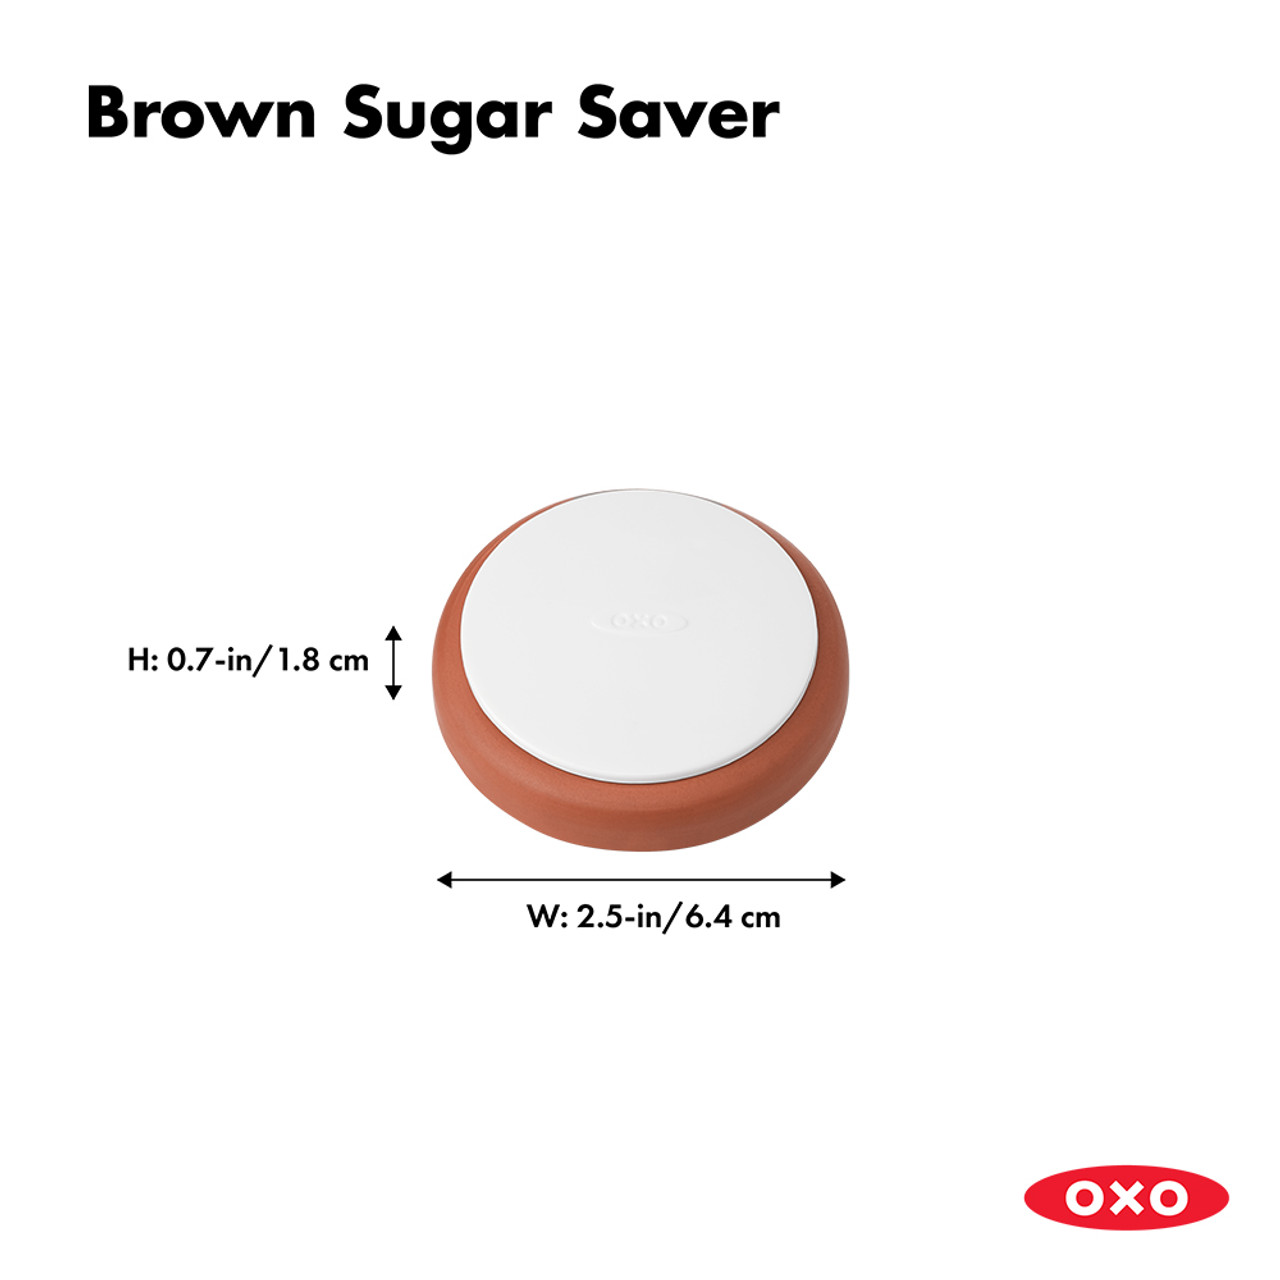 OXO POP Brown Sugar Keeper - The Peppermill